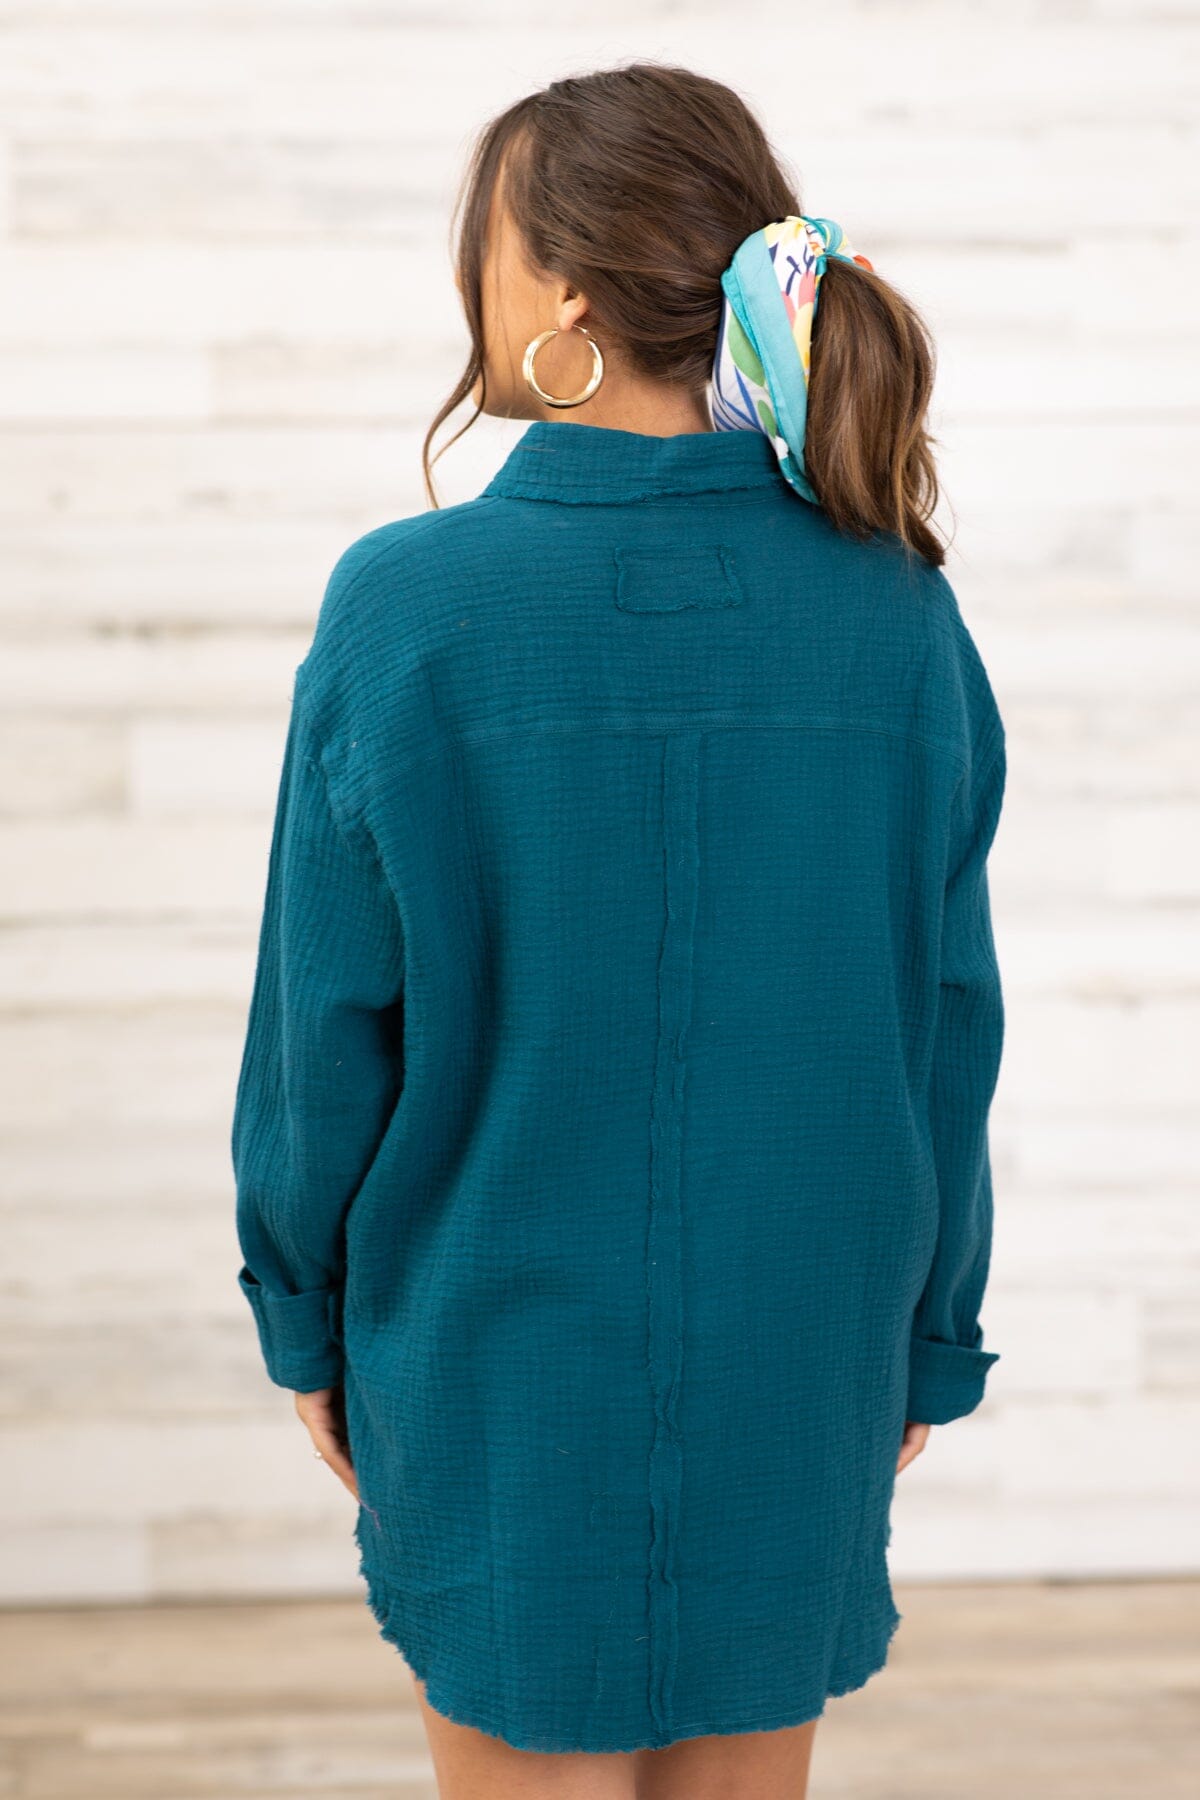 Teal Textured Button Up Top With Pocket - Filly Flair